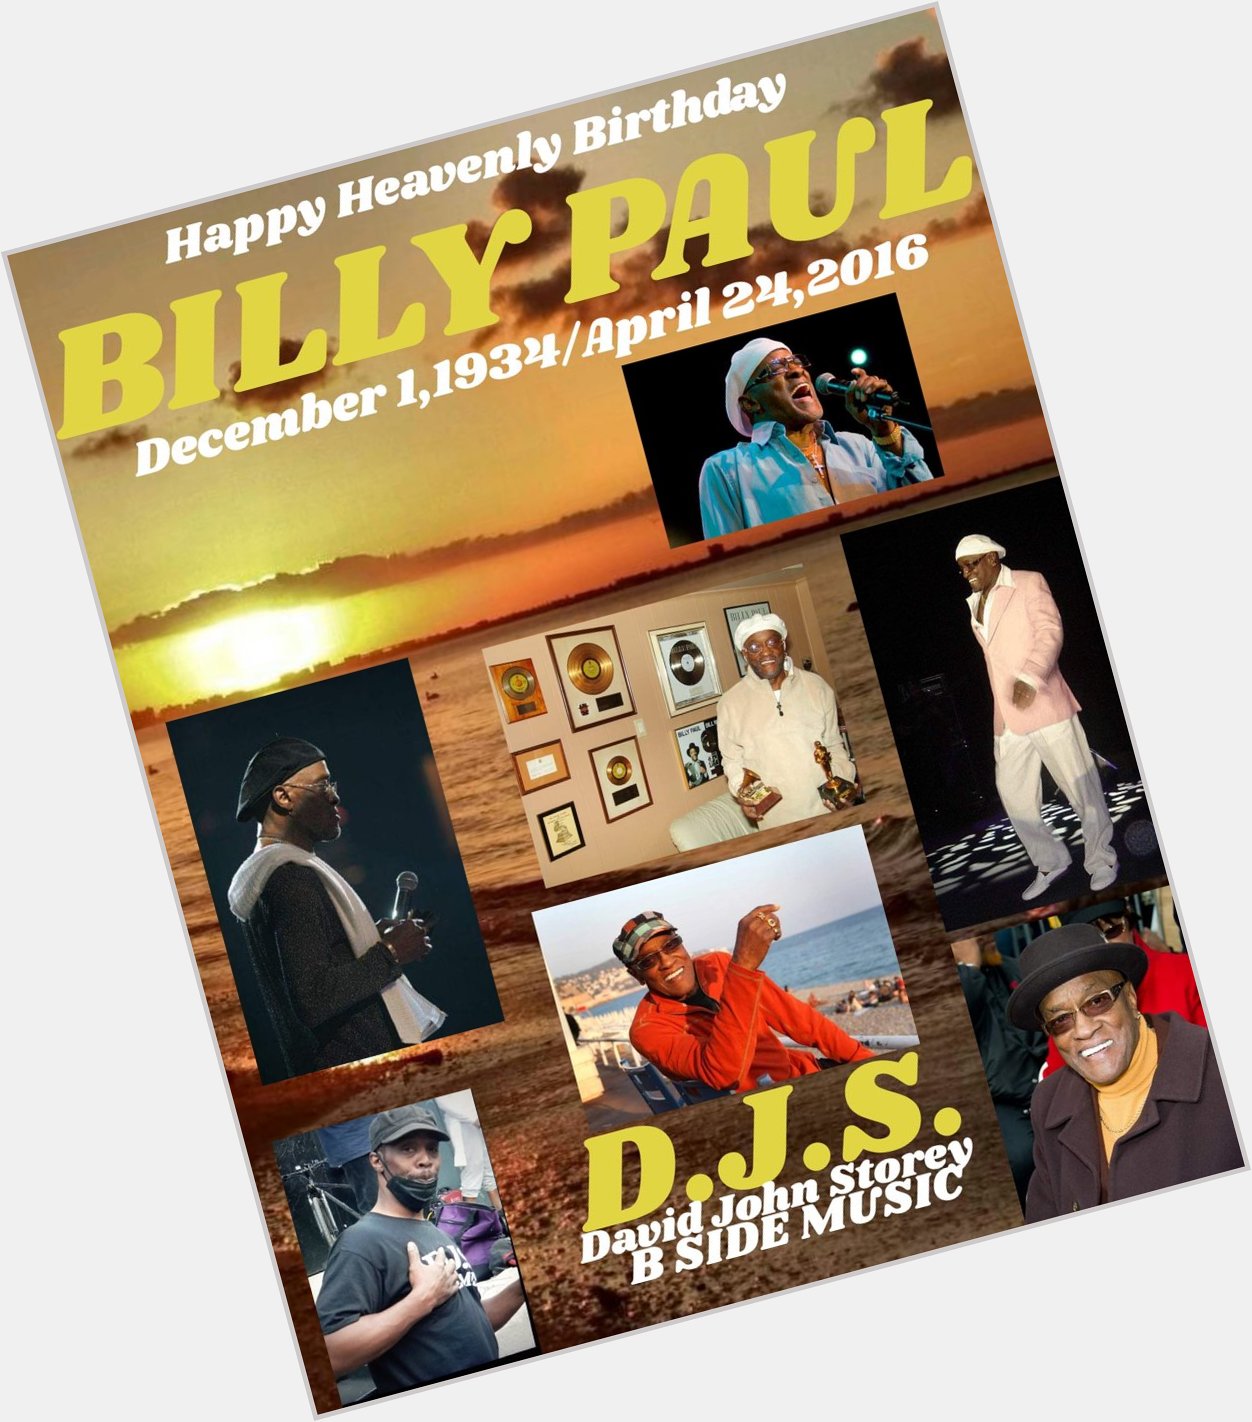 I(D.J.S.)\"B SIDE\" taking time to say Happy Heavenly Birthday to Singer: \"BILLY PAUL\". 